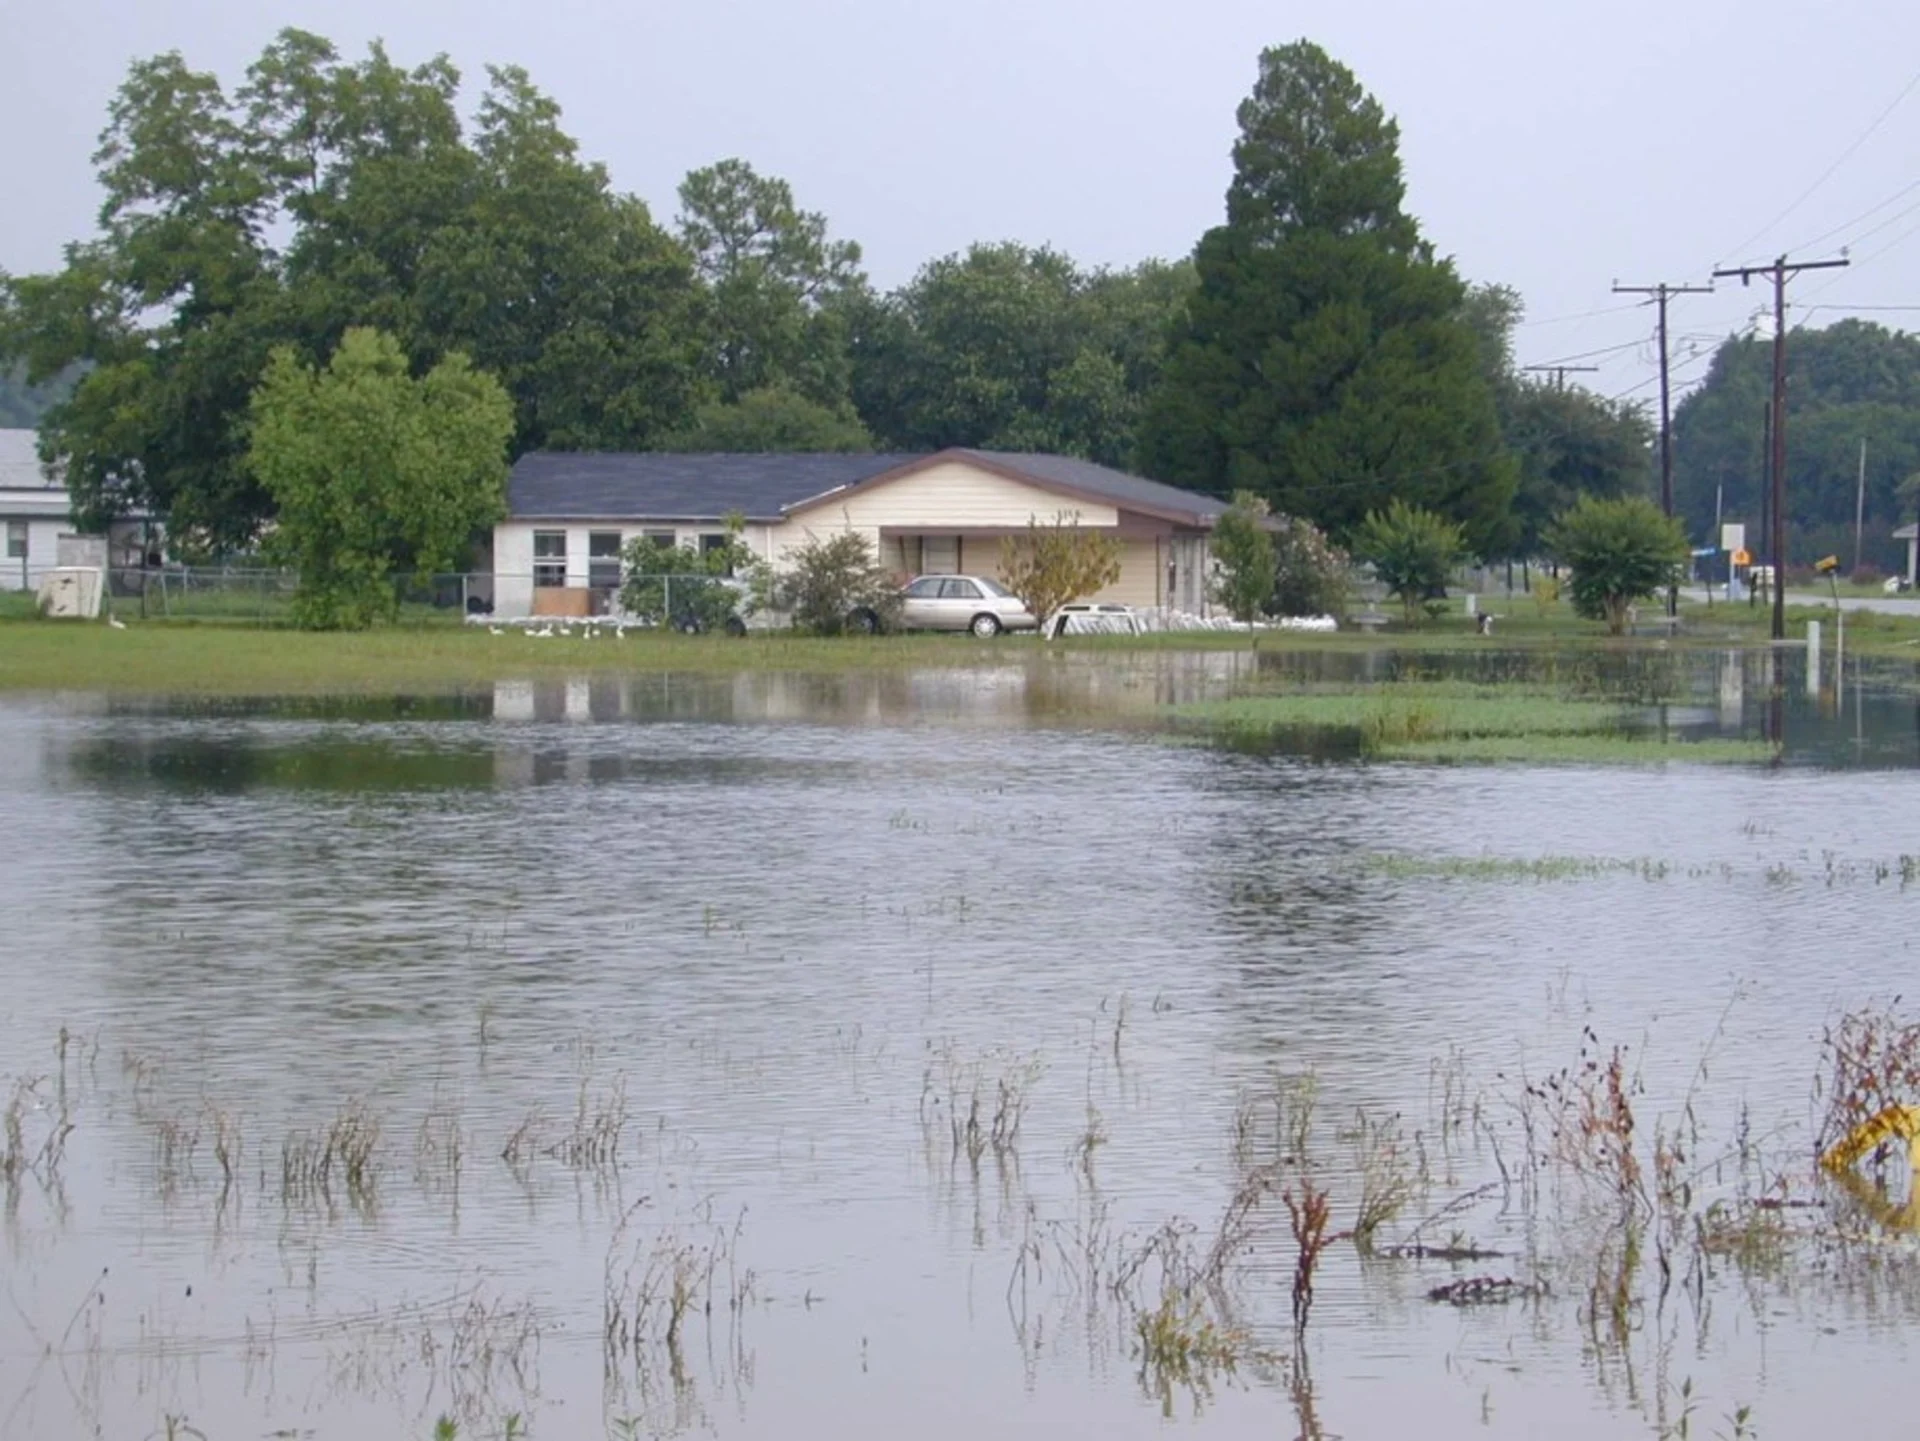 Tropical Storm Allison wasn't a hurricane, but it caused widespread devastation